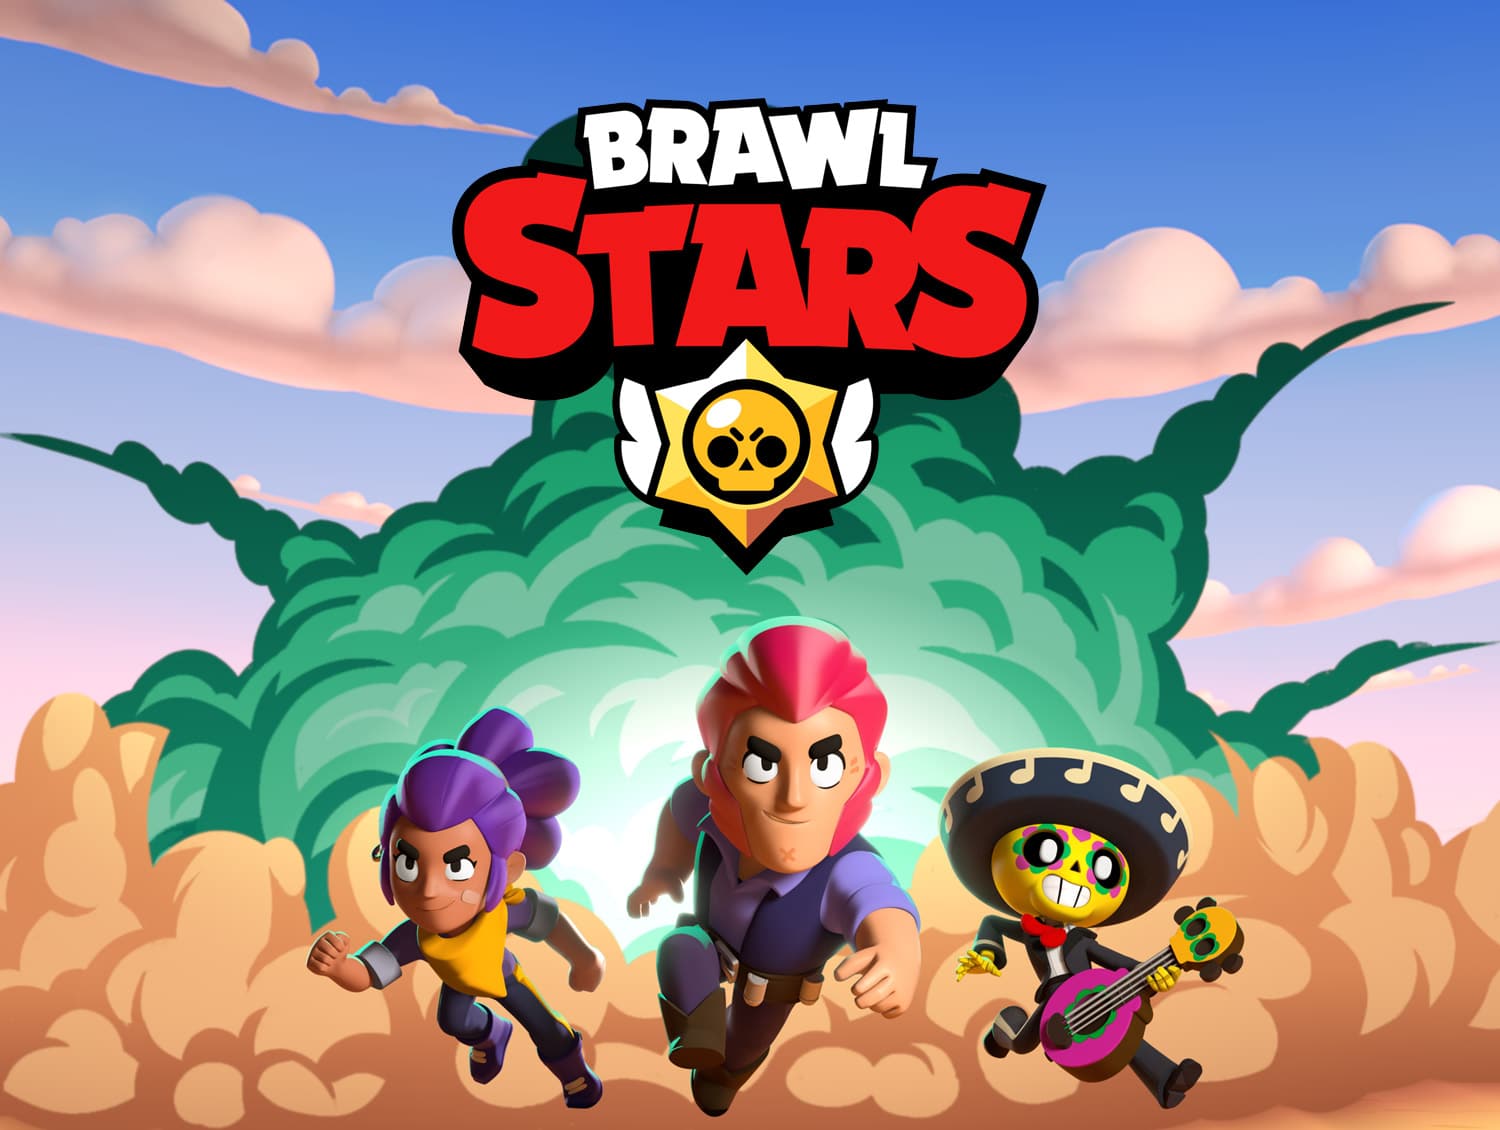 Brawl Stars Fans Disturbed by Mysterious Events in the Game